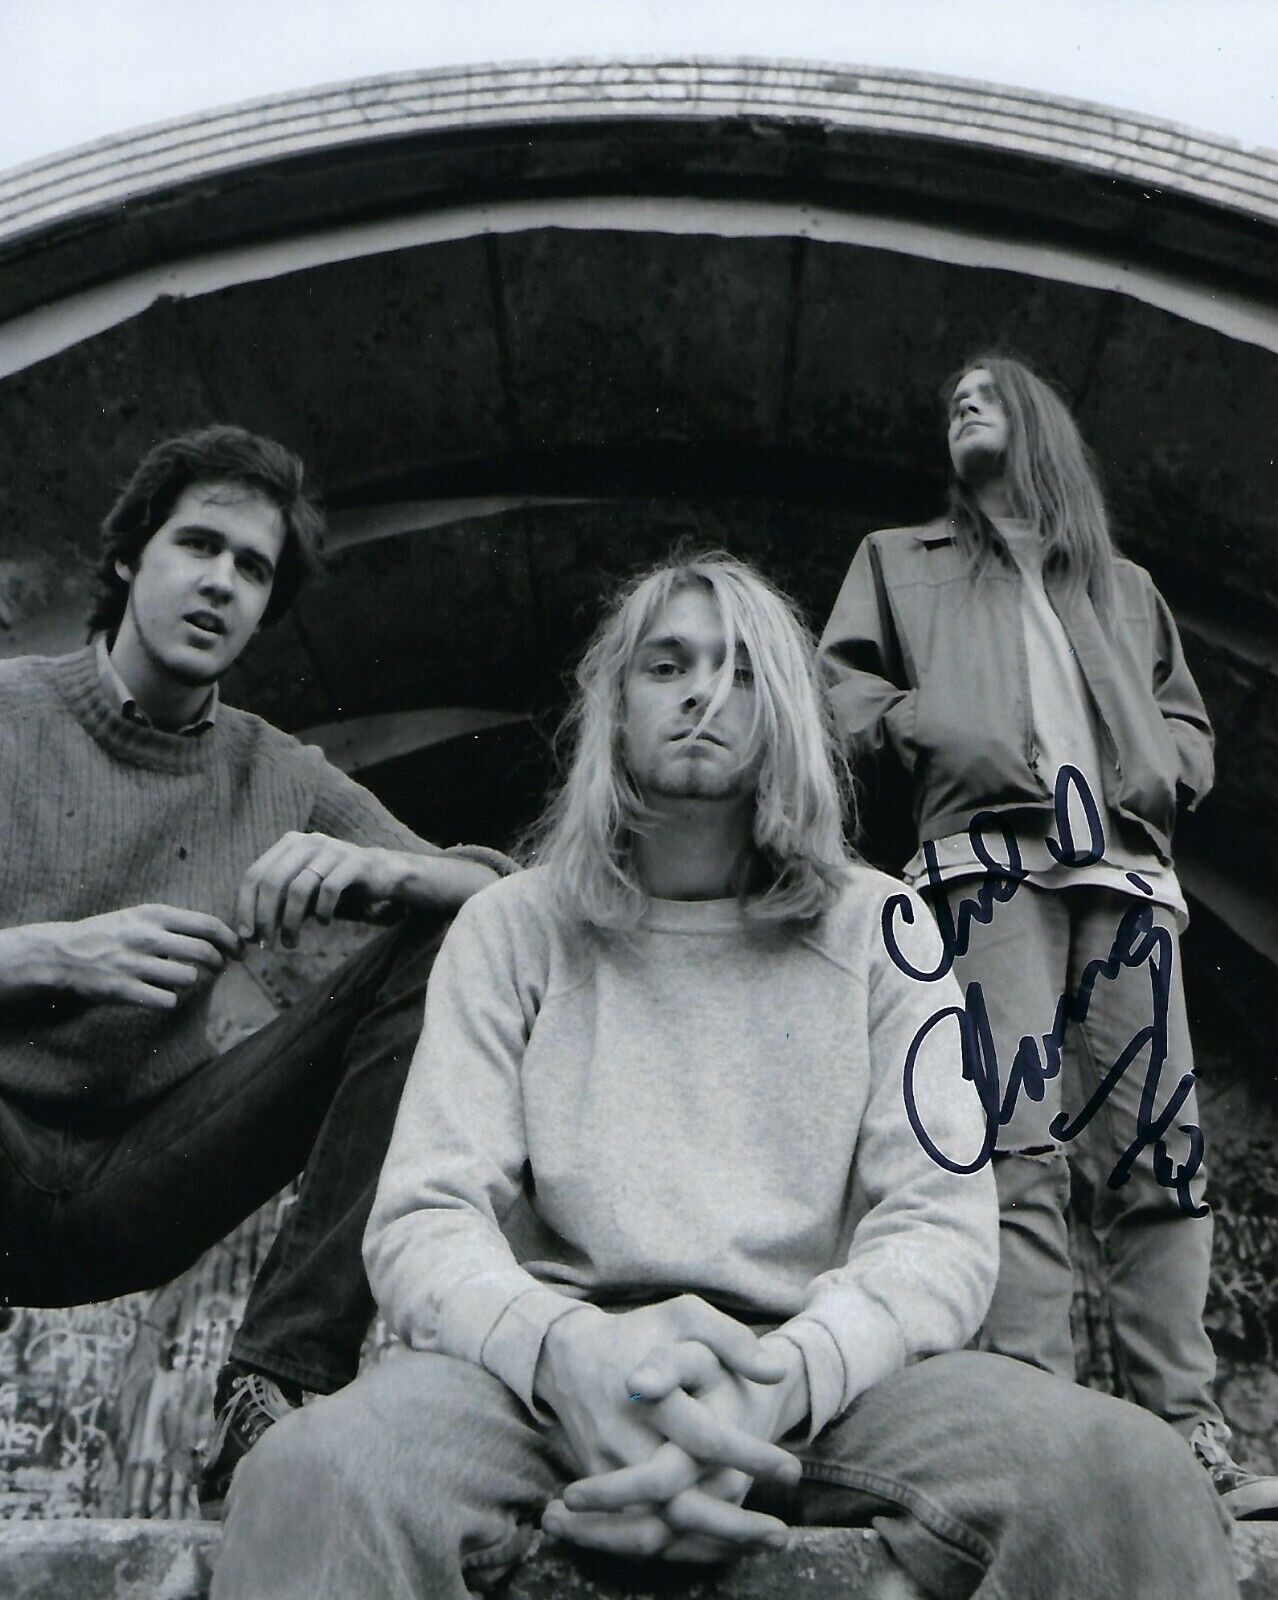 GFA Nirvana Drummer Bleach * CHAD CHANNING * Signed 8x10 Photo Poster painting C5 COA